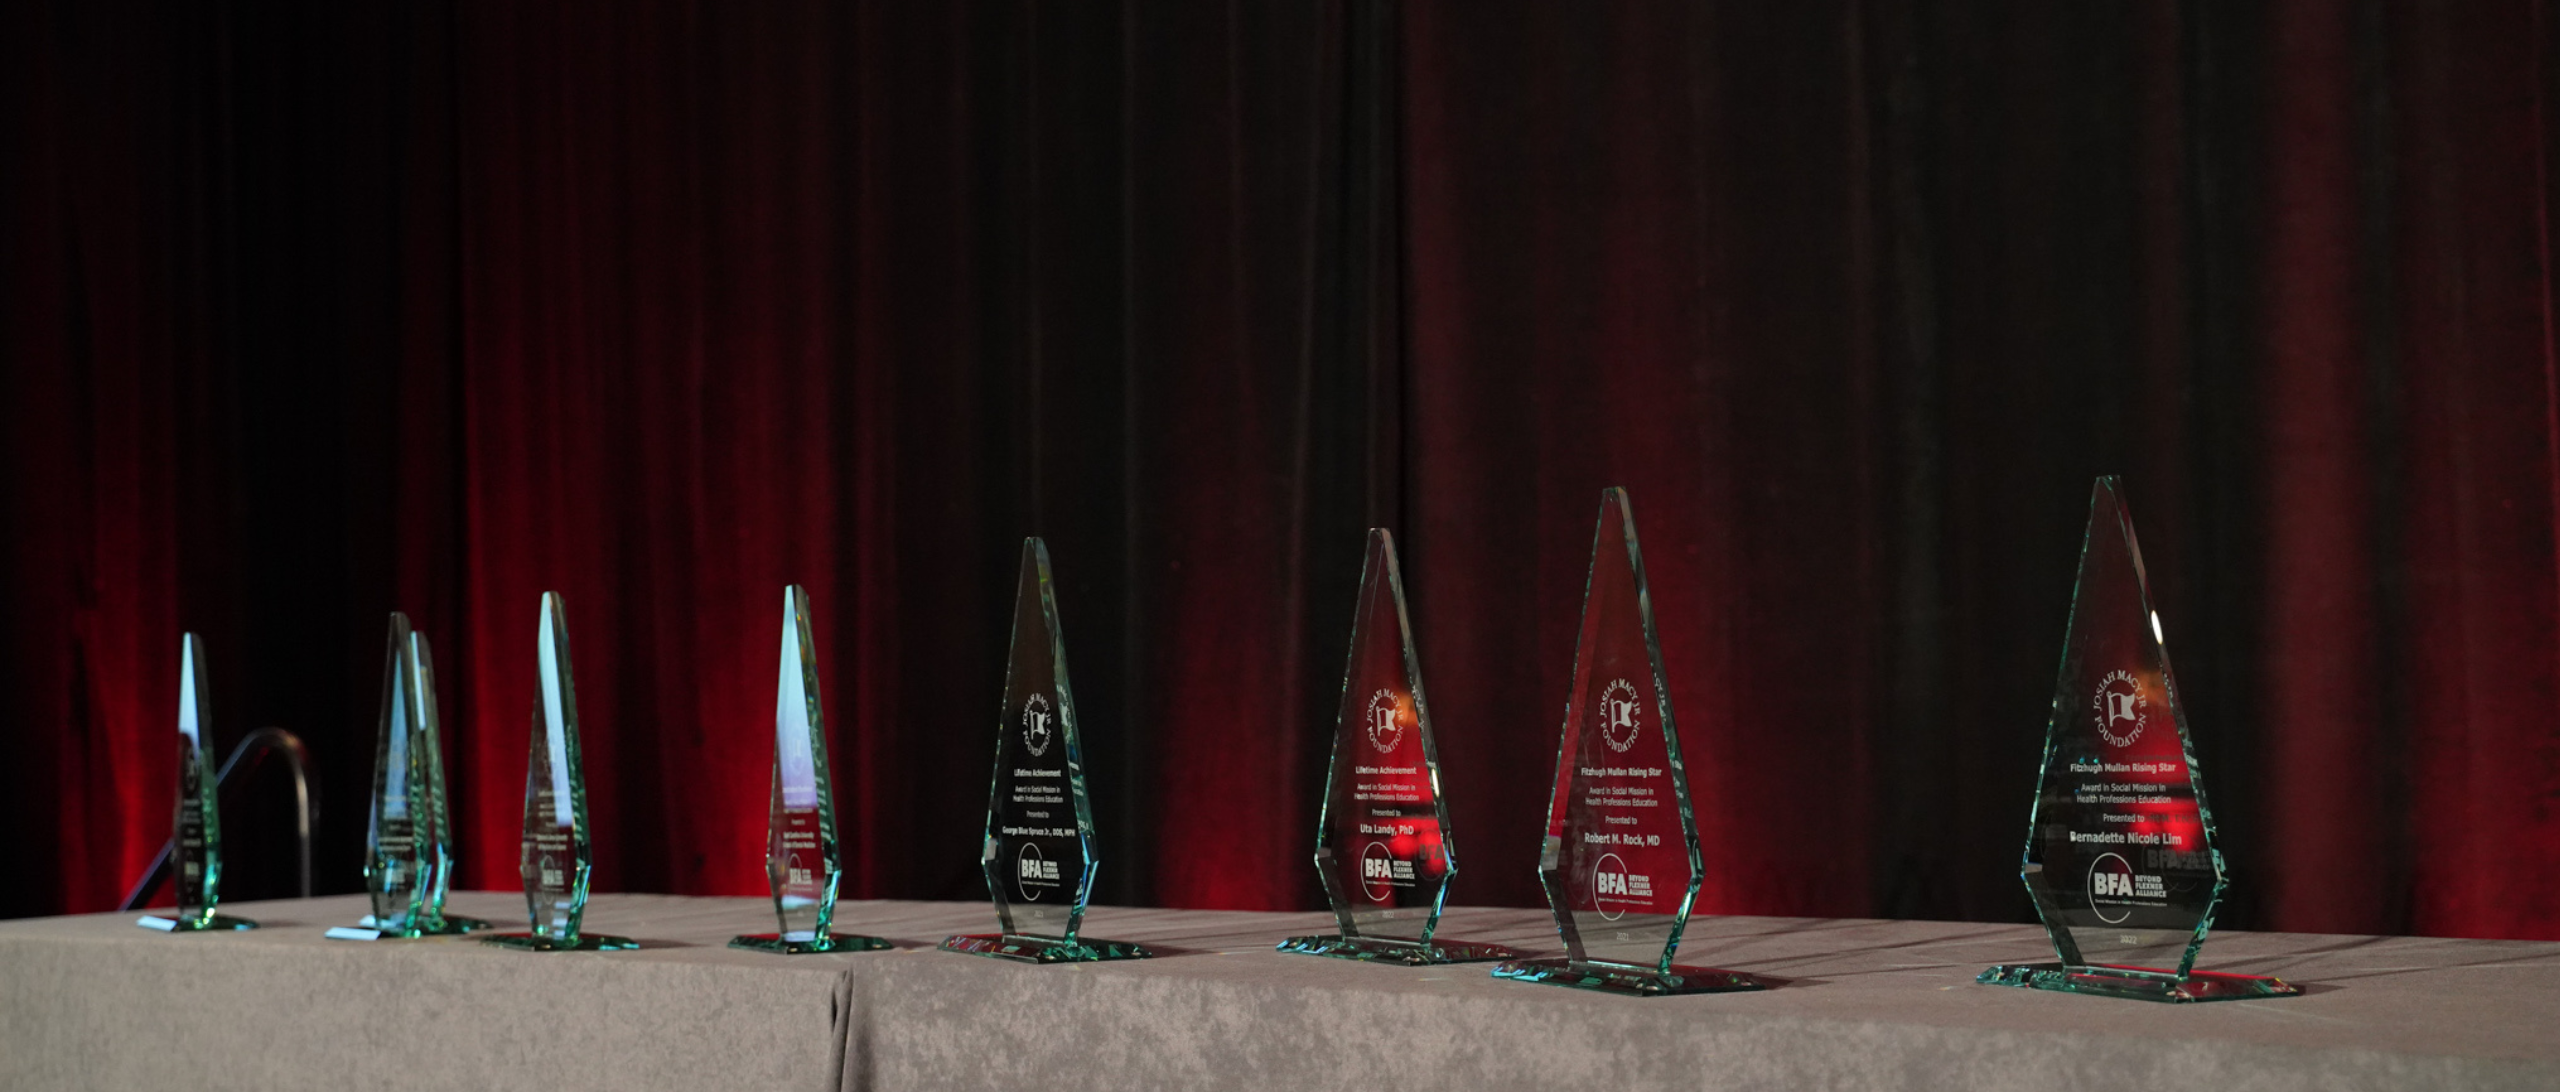 Glass Macy Awards trophies sit on a table